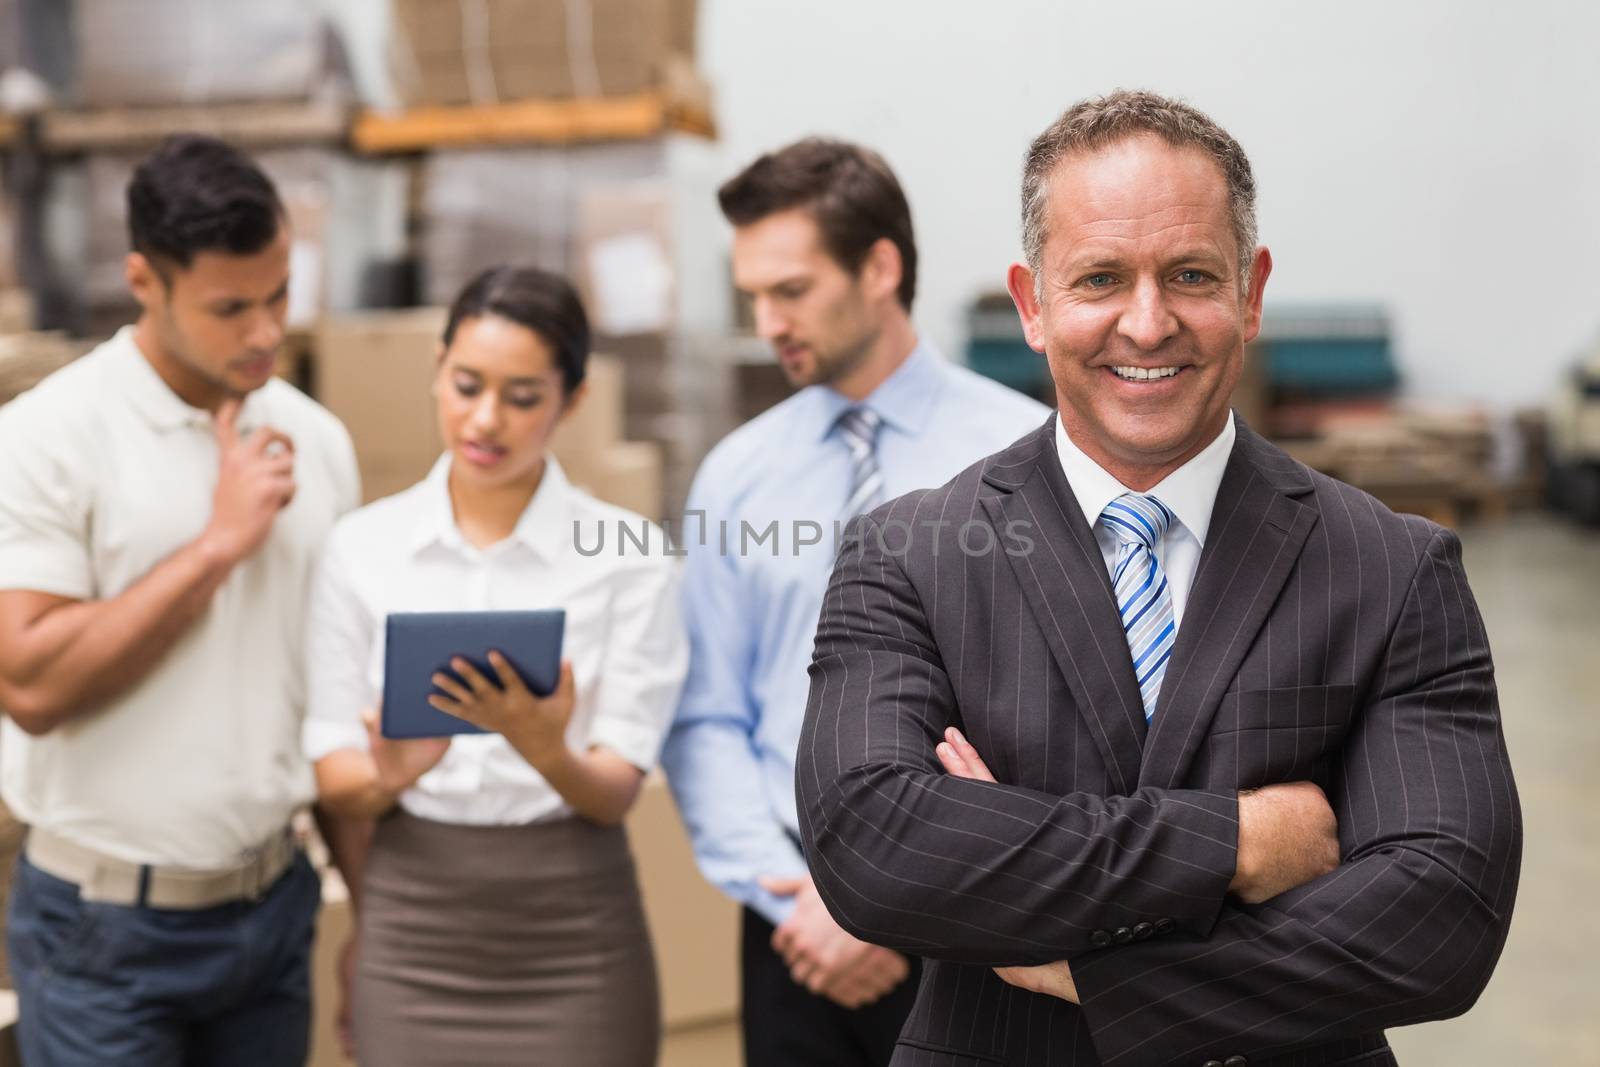 Boss standing with arms crossed in front of his employees by Wavebreakmedia